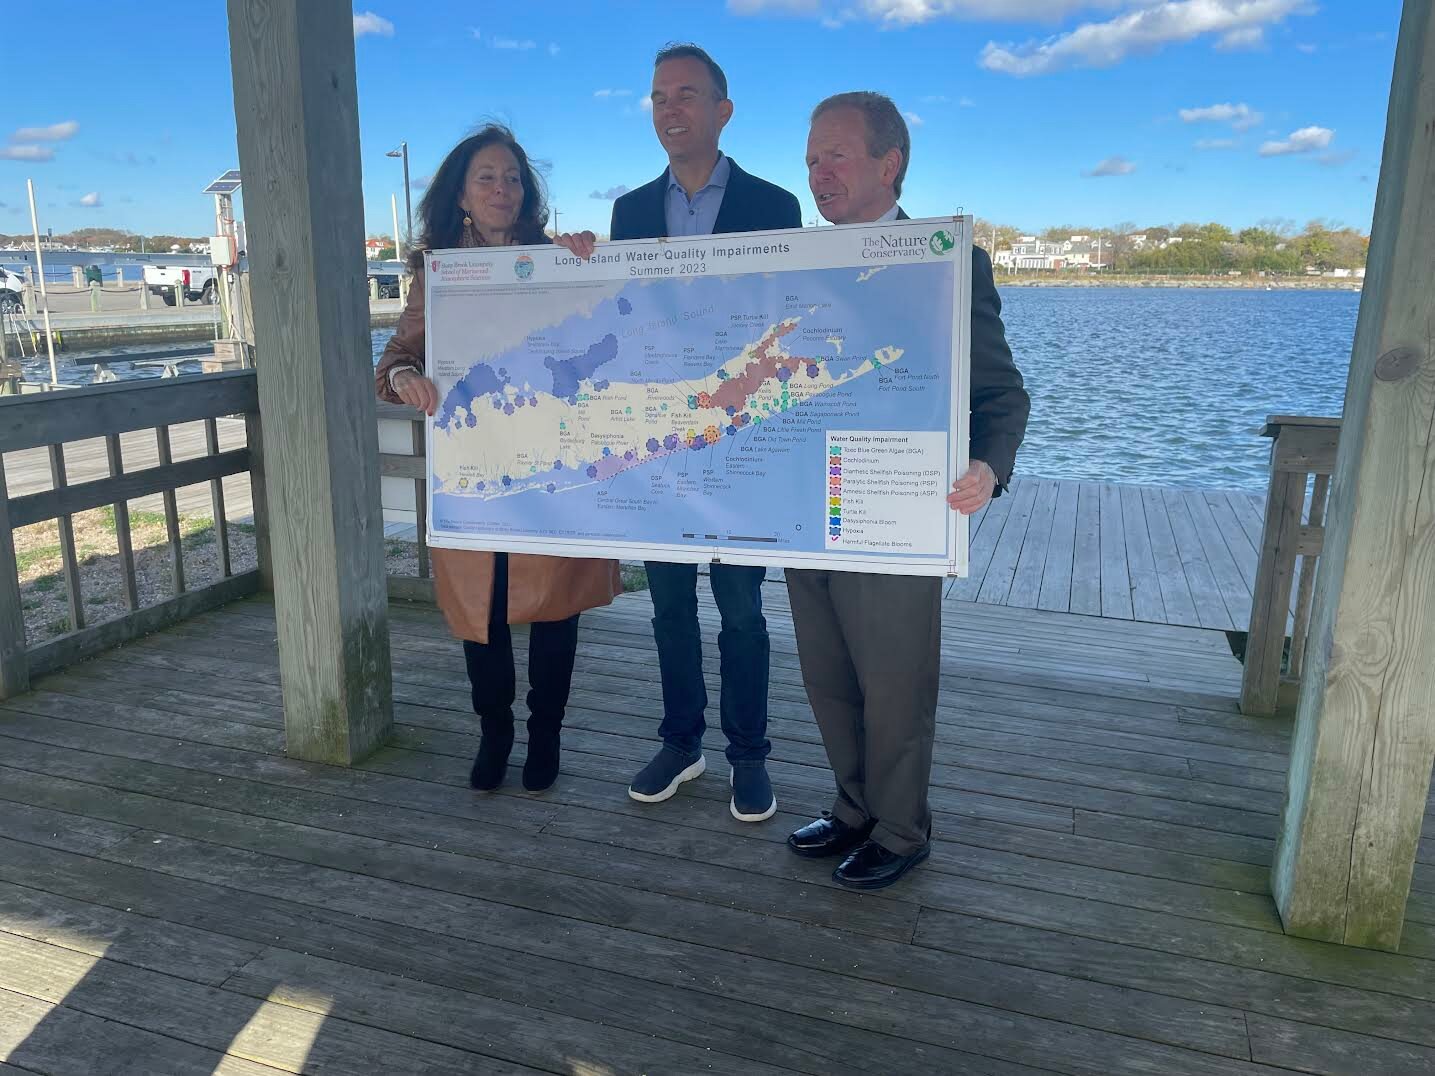 Speakers at the Oct. 31 press conference, from left to right: Adrienne Esposito, director of Citizens Campaign for the Environment; Chris Gobler, professor at Stony Brook University; and Peter Scully, deputy executive of Suffolk County.